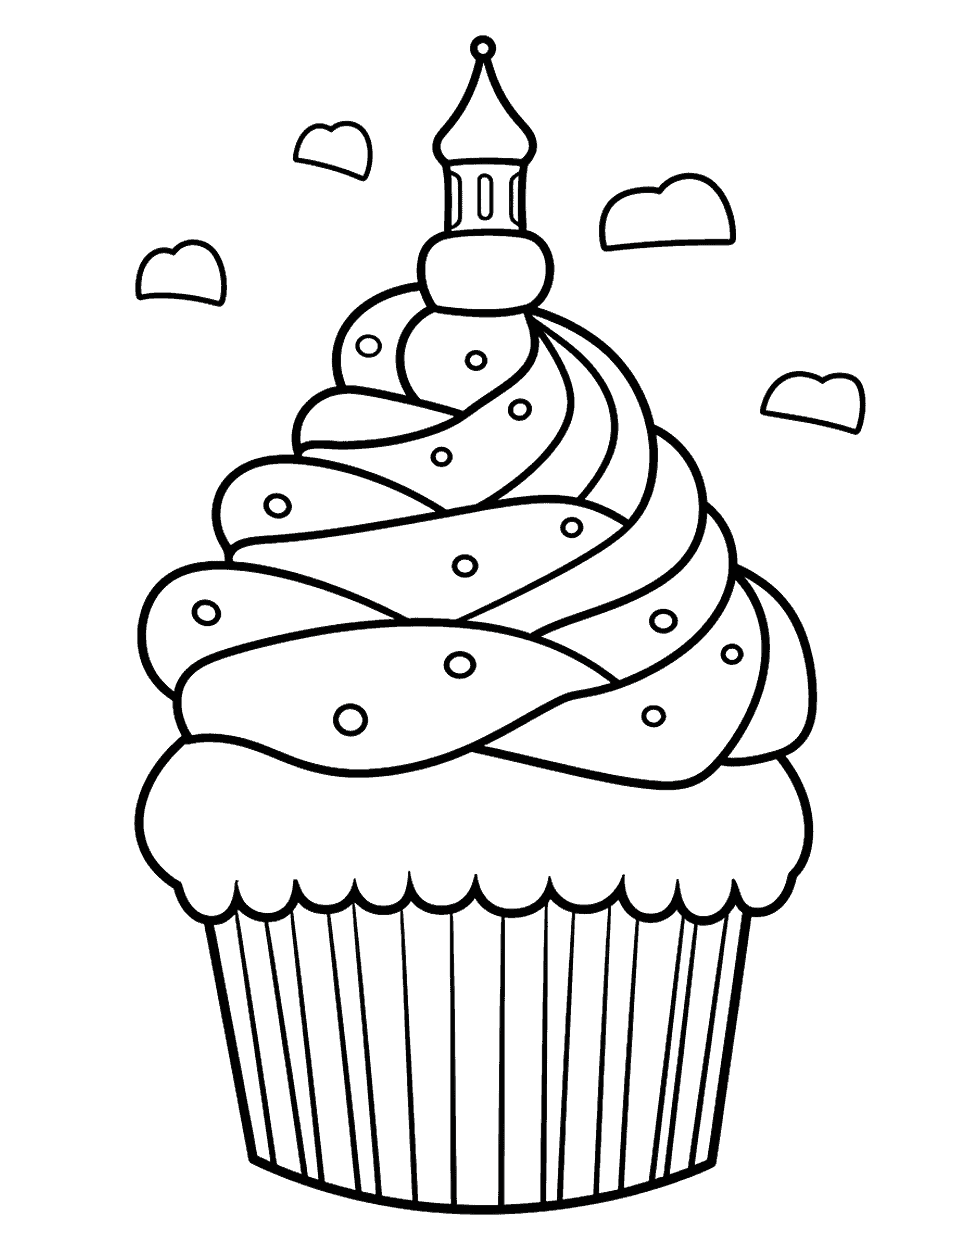 Princess Castle Cupcake Coloring Page - A cupcake designed to look like a fairytale castle.